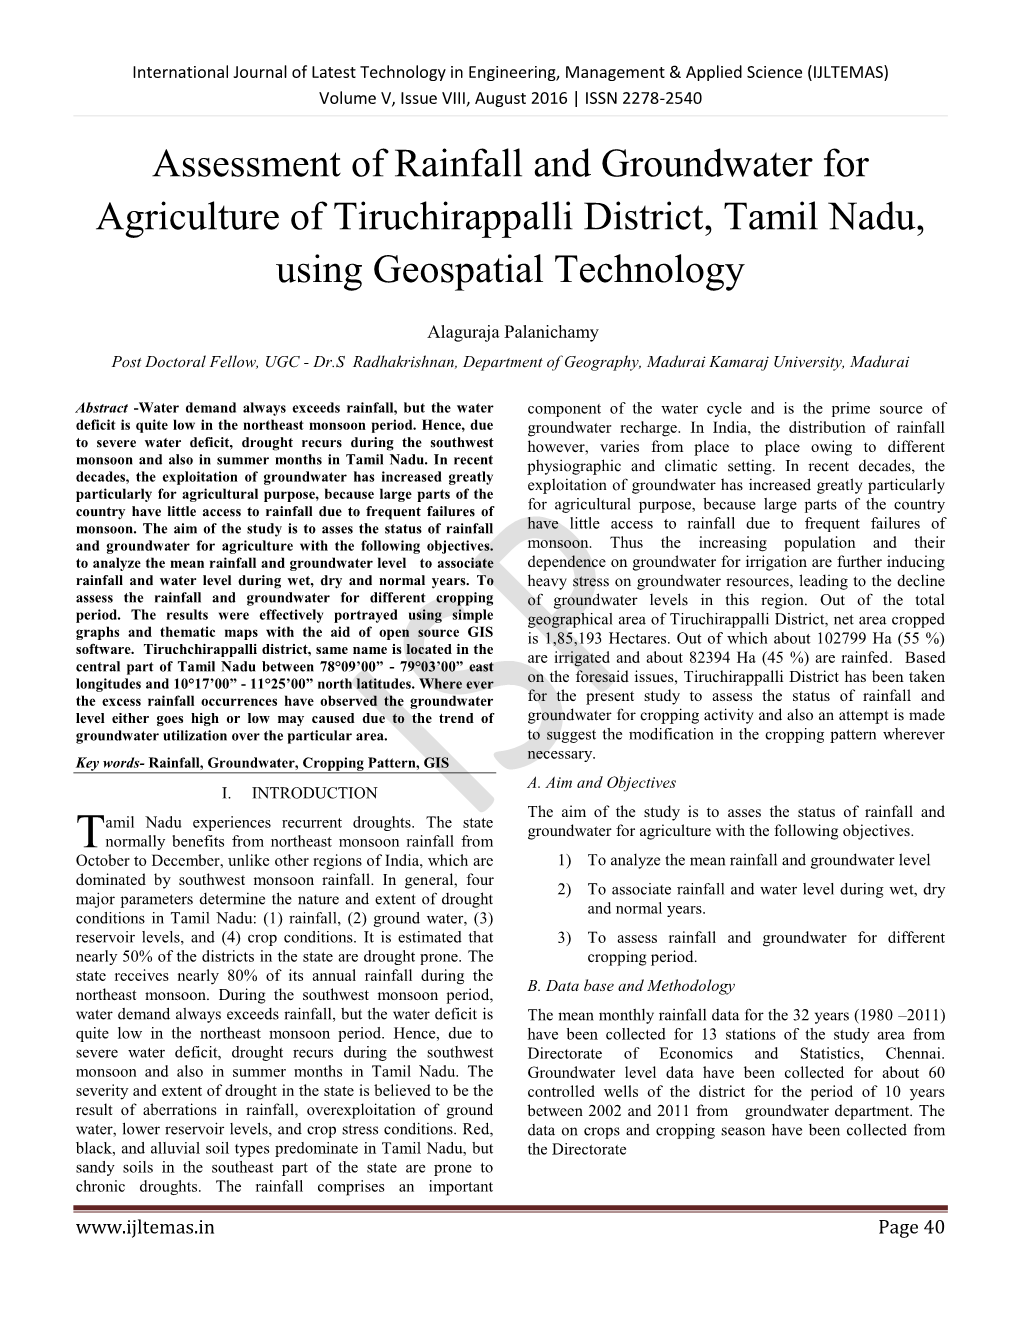 Assessment of Rainfall and Groundwater for Agriculture of Tiruchirappalli District, Tamil Nadu, Using Geospatial Technology